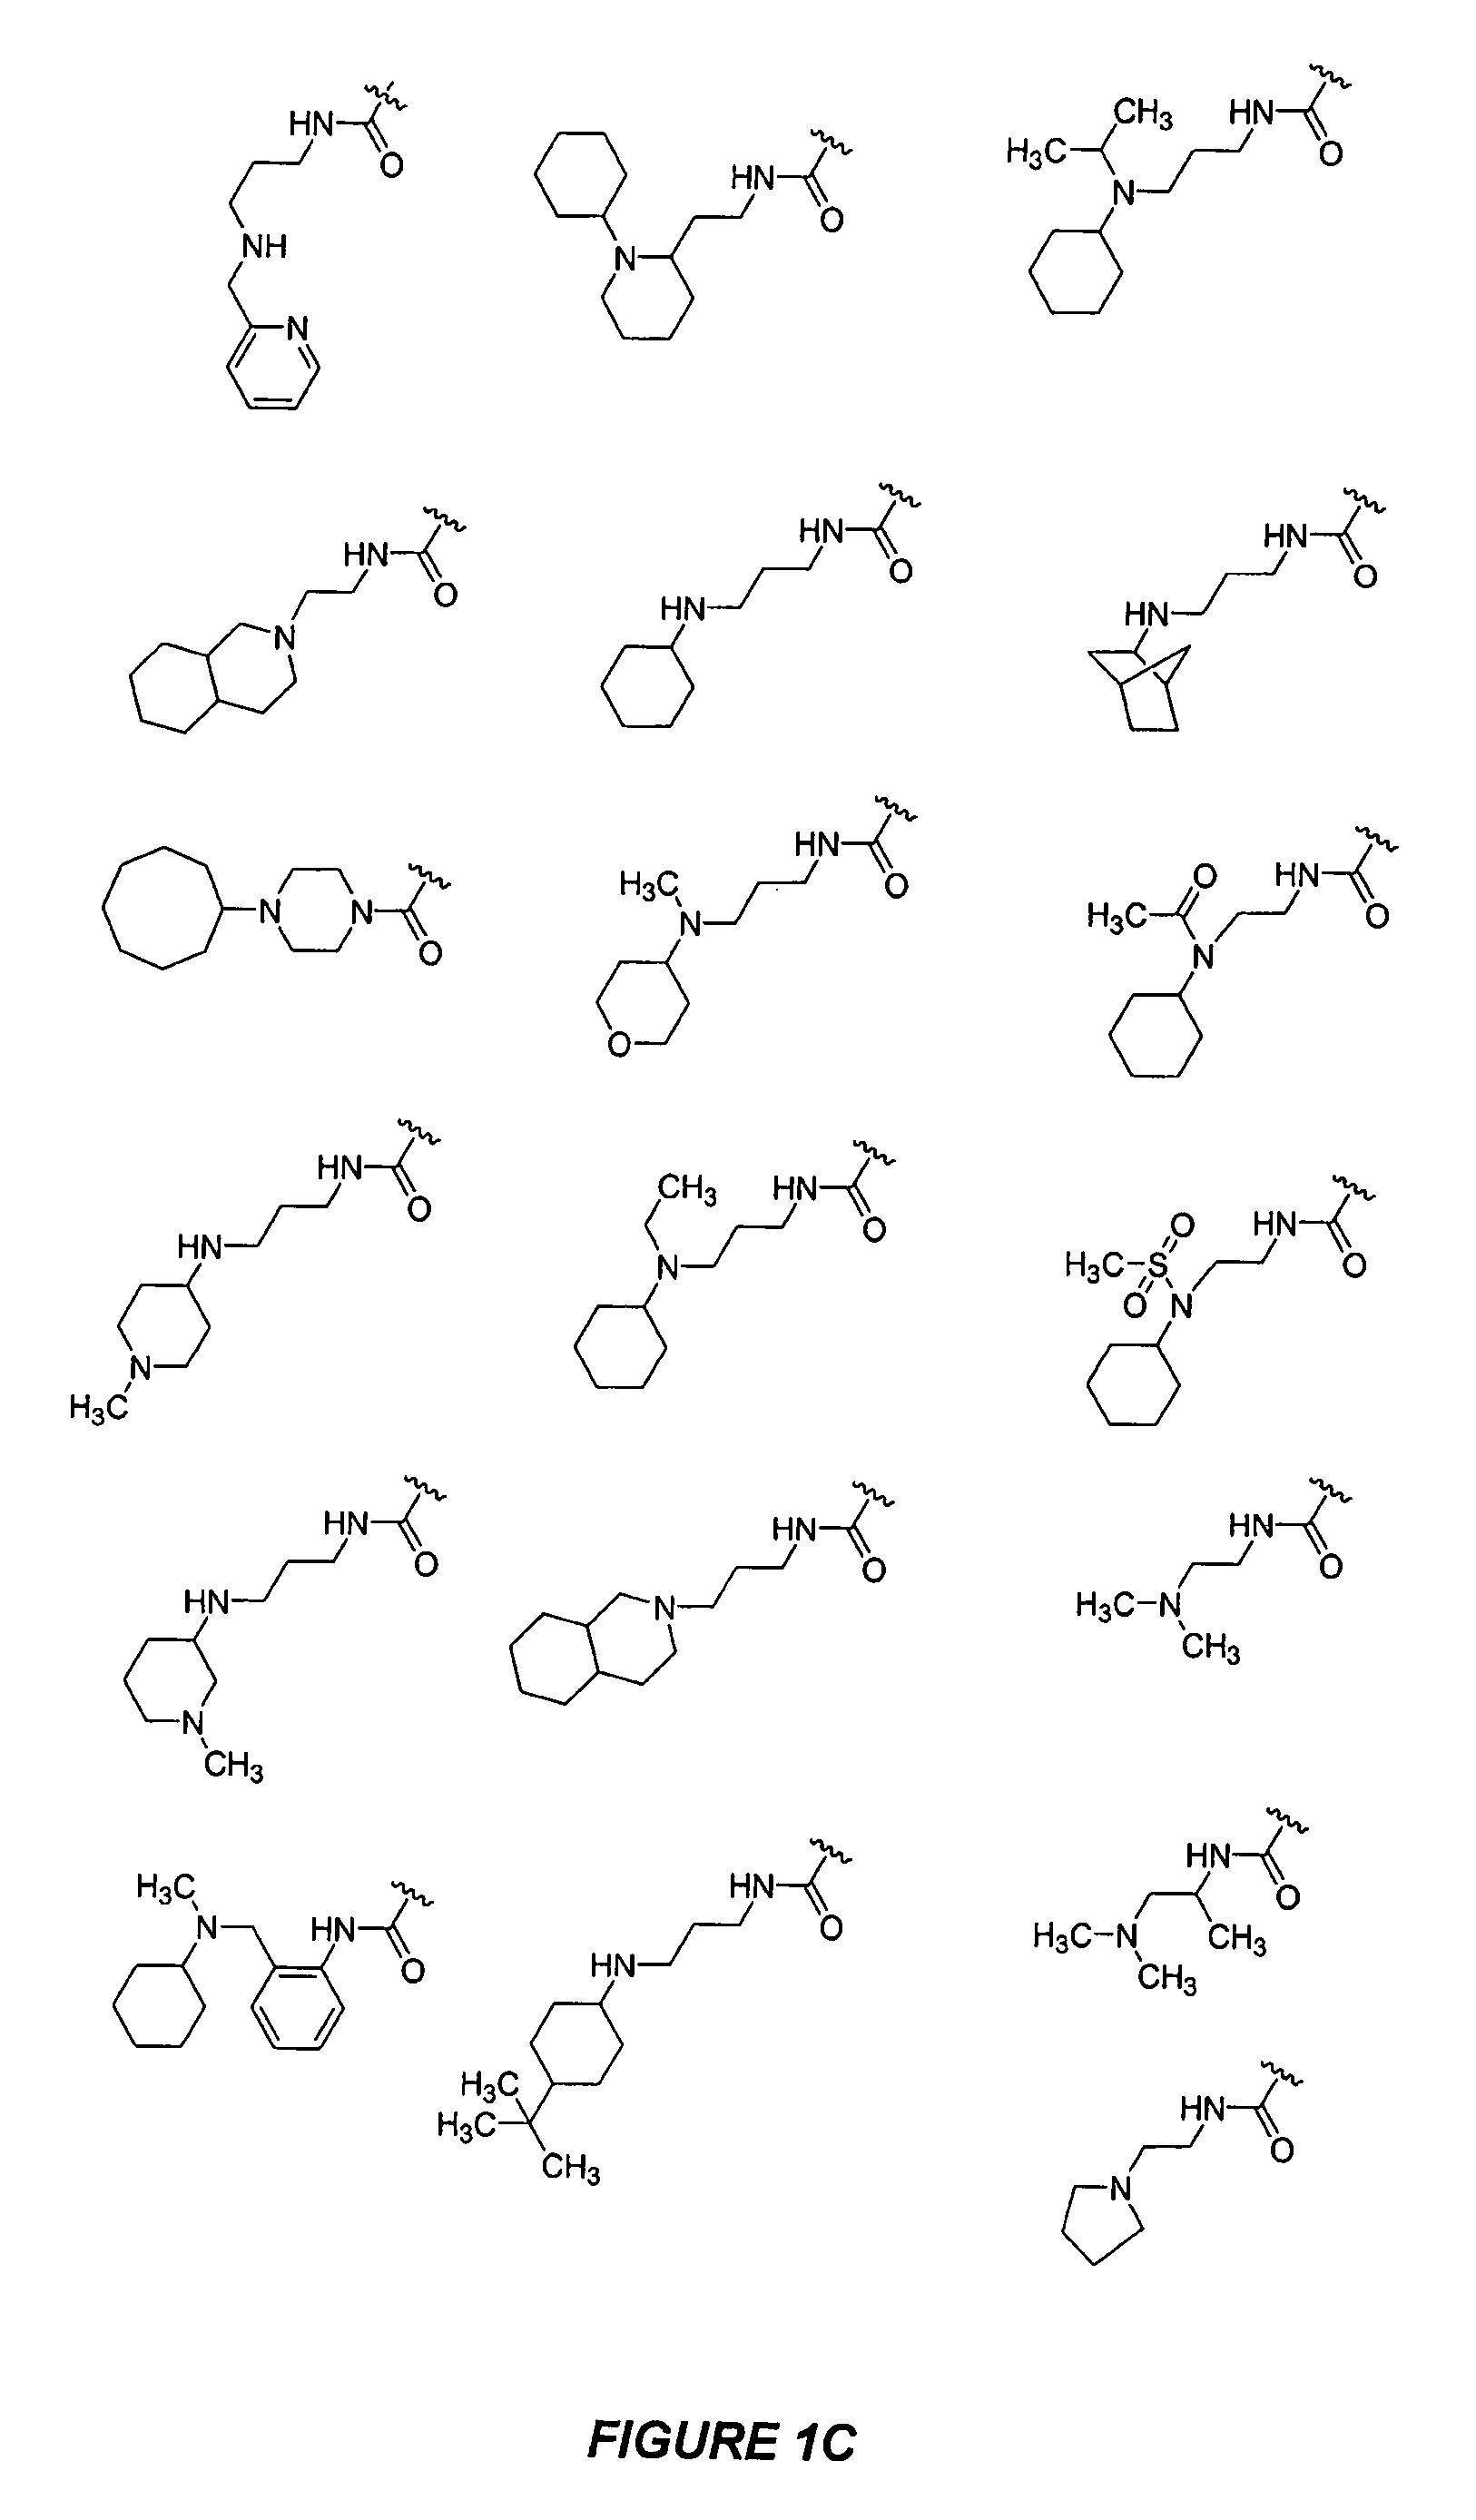 Bicyclic, nitrogen-containing compounds modulating CXCR4 and/or CCXCKR2